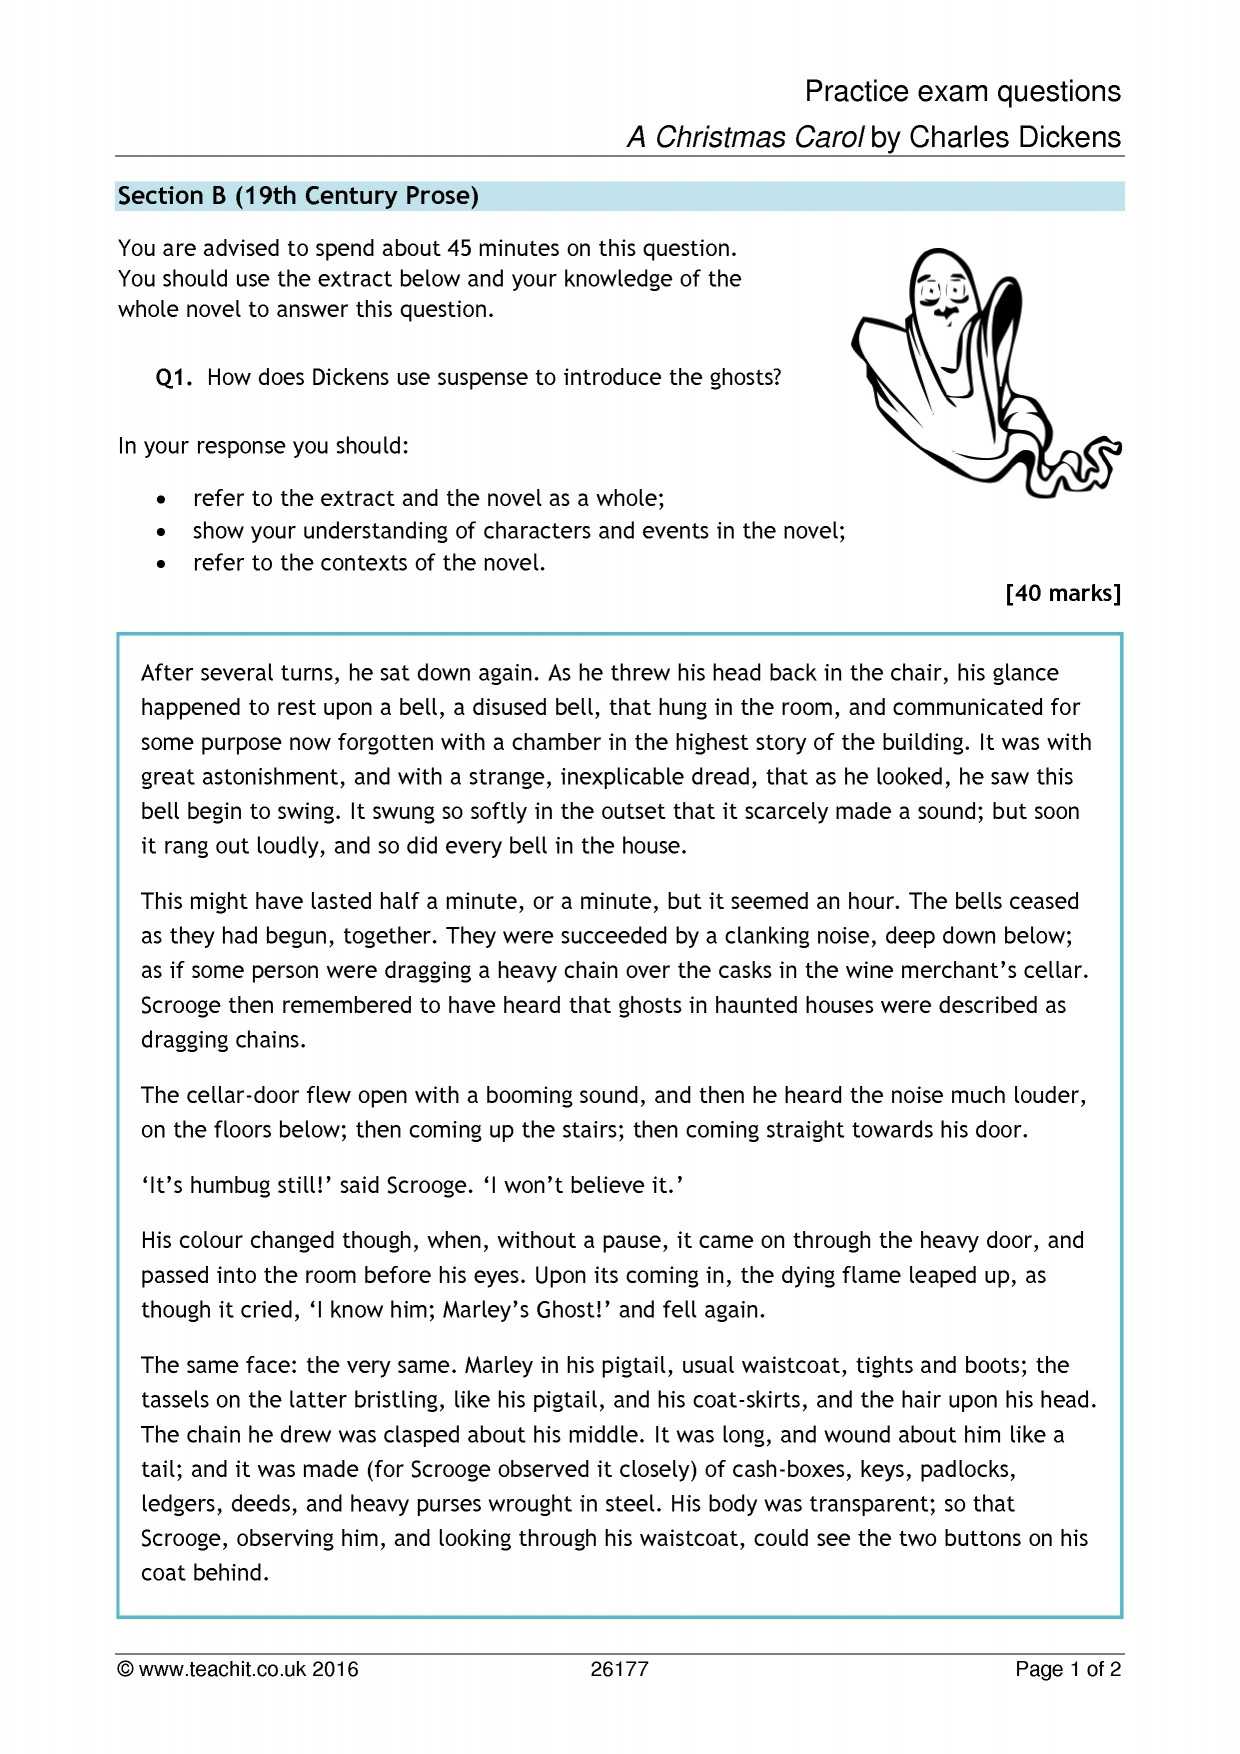 Free Nutrition Worksheets Along with Lesson Worksheets Luxury English Worksheets About Christmas